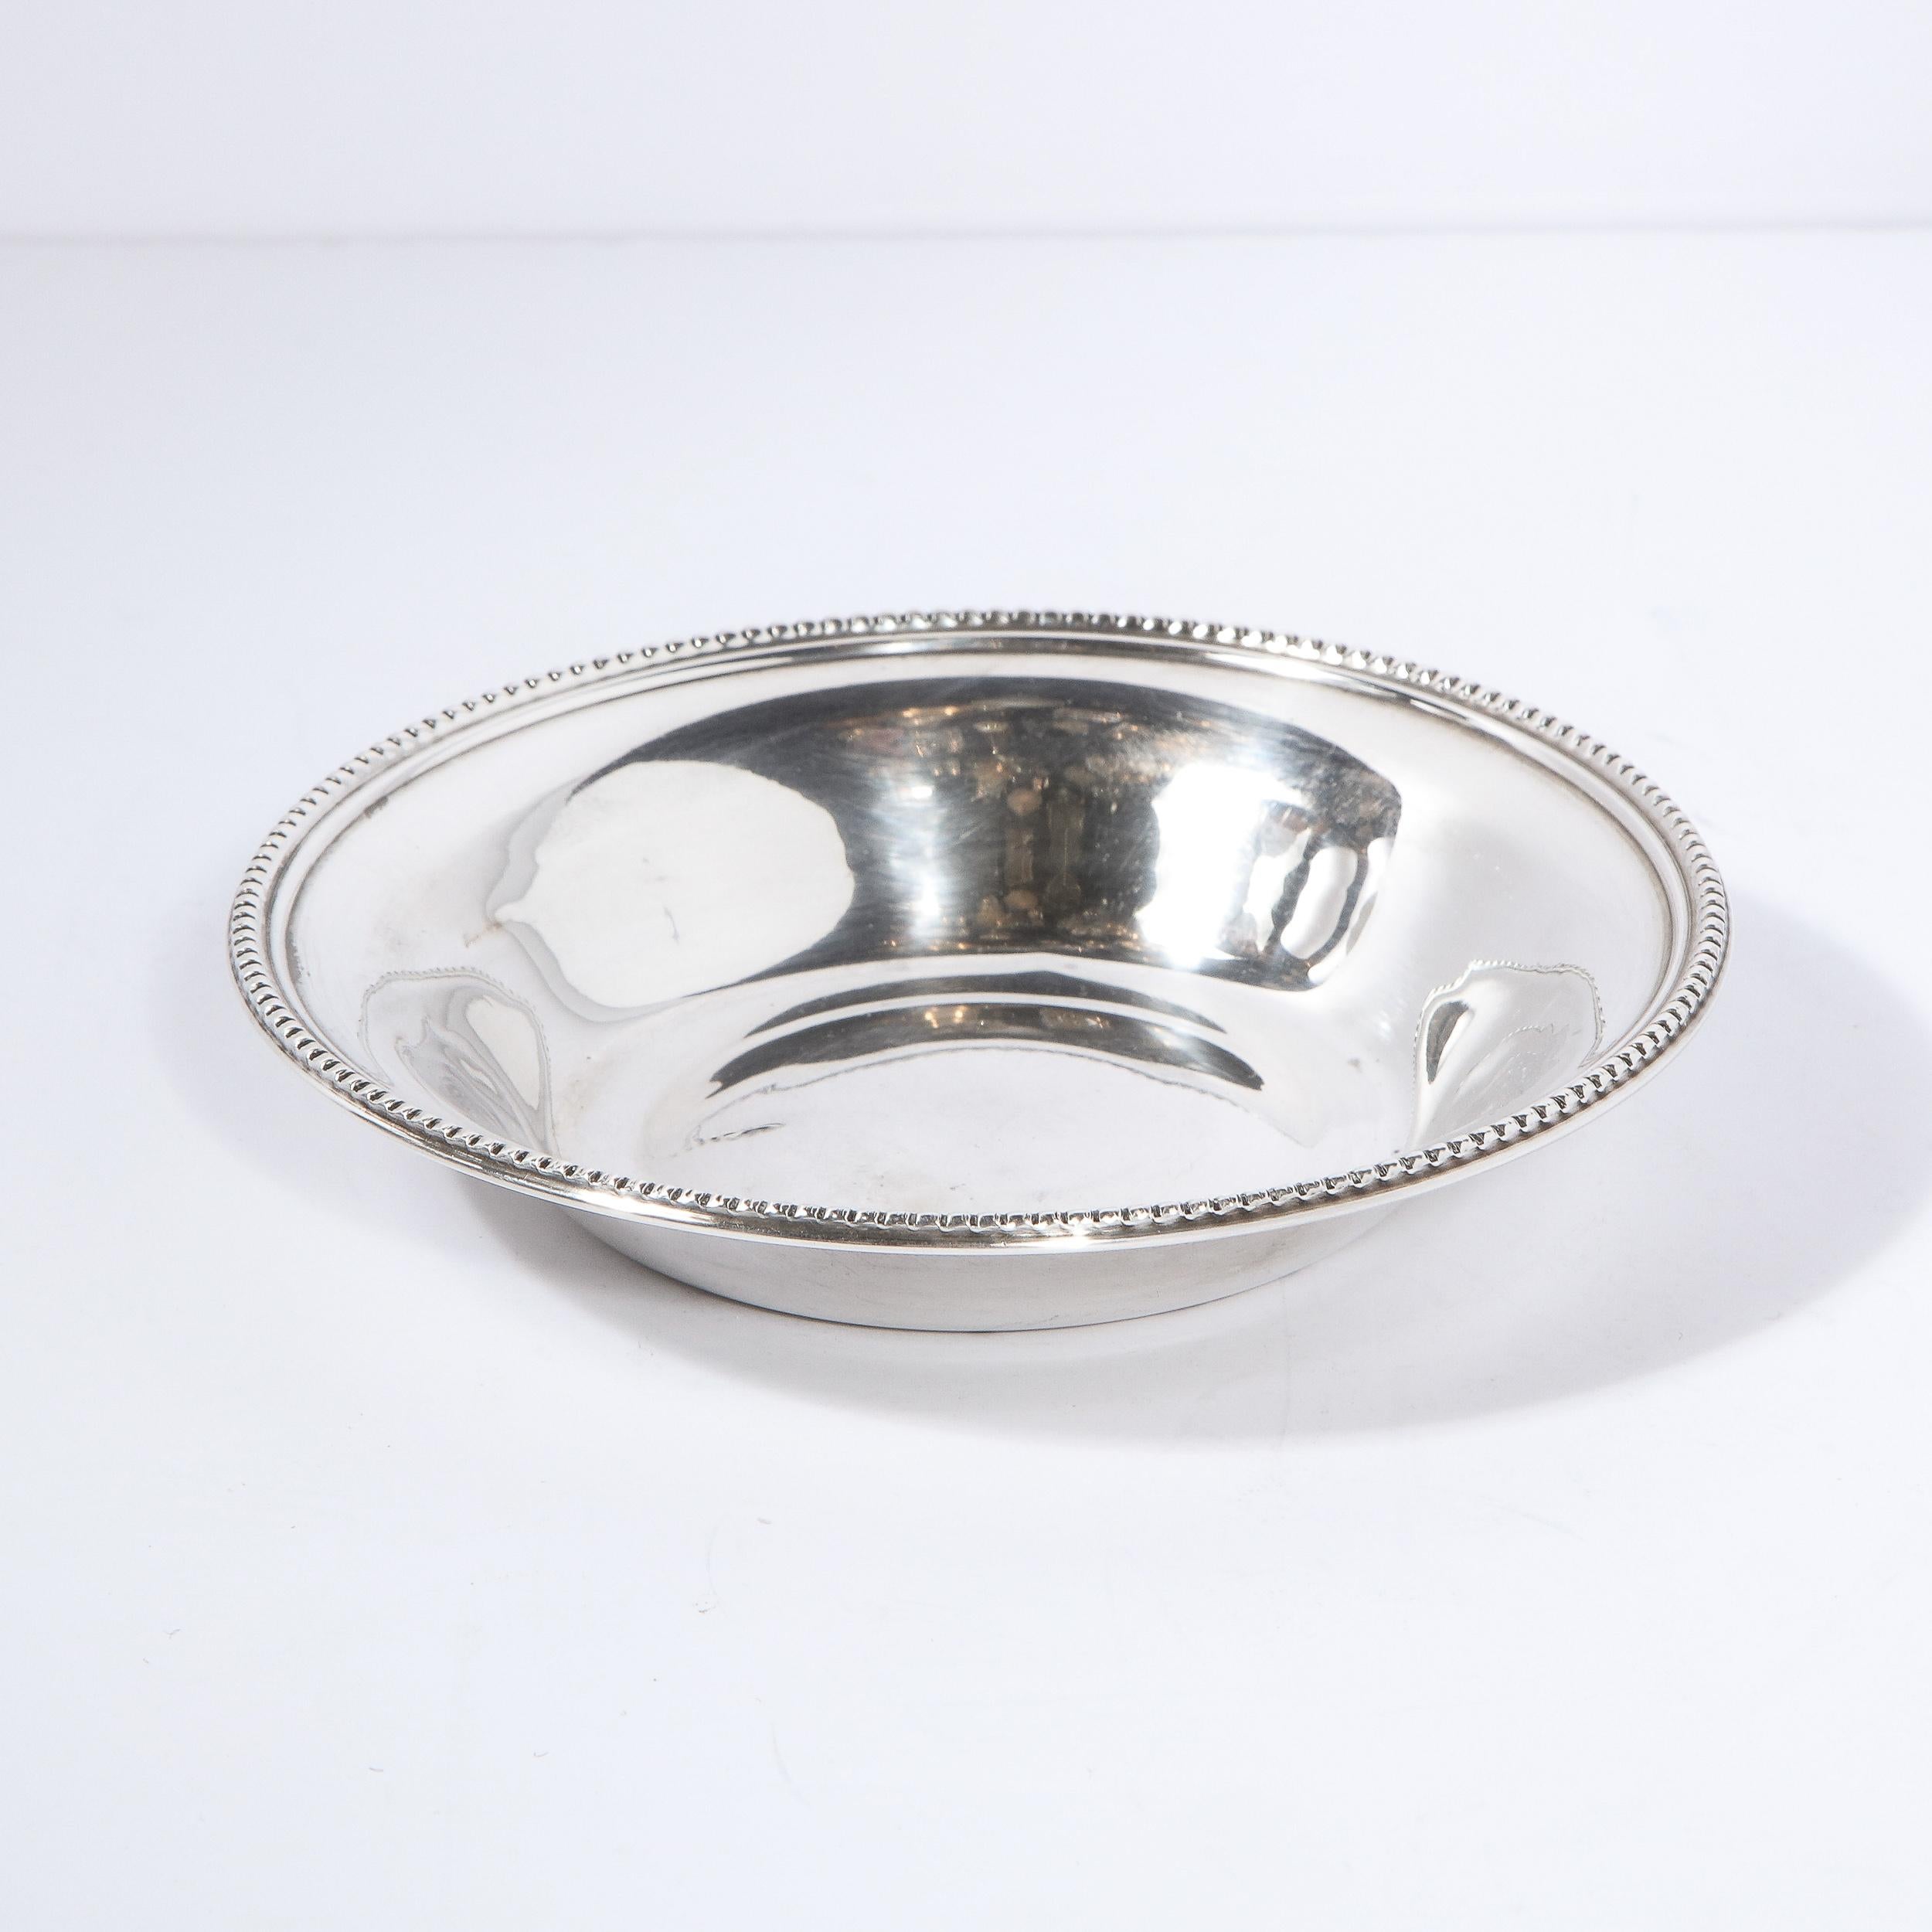 This beautiful Mid-Century Modern sterling silver decorative dish/ bowl was realized in the United States circa 1950. It features a circular bottom, gently rounded sides and a beaded perimeter all in lustrous sterling silver. With its clean